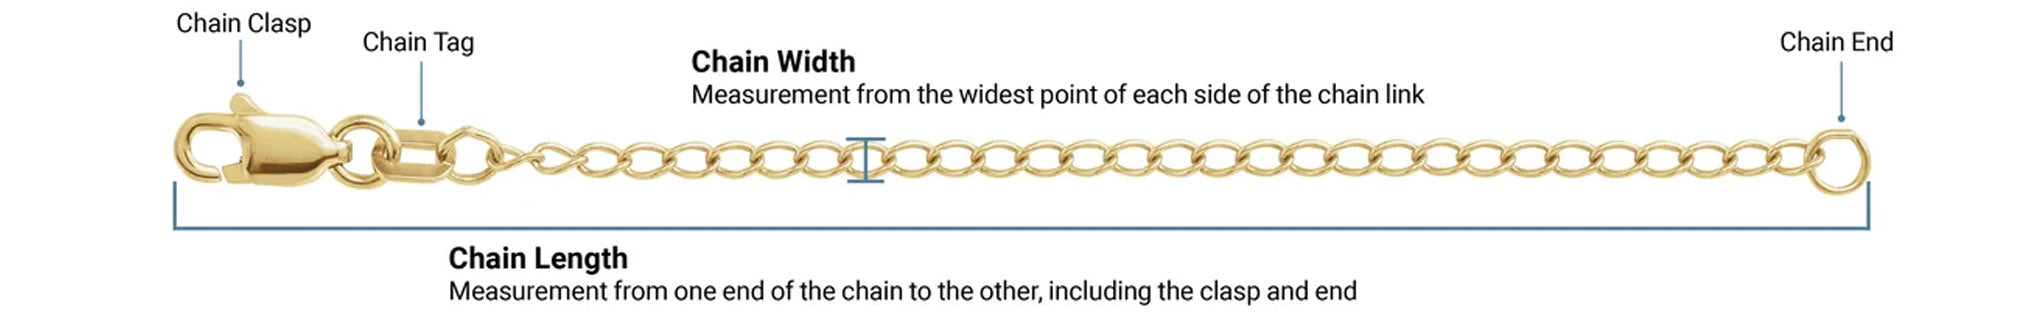 Parts of a Chain